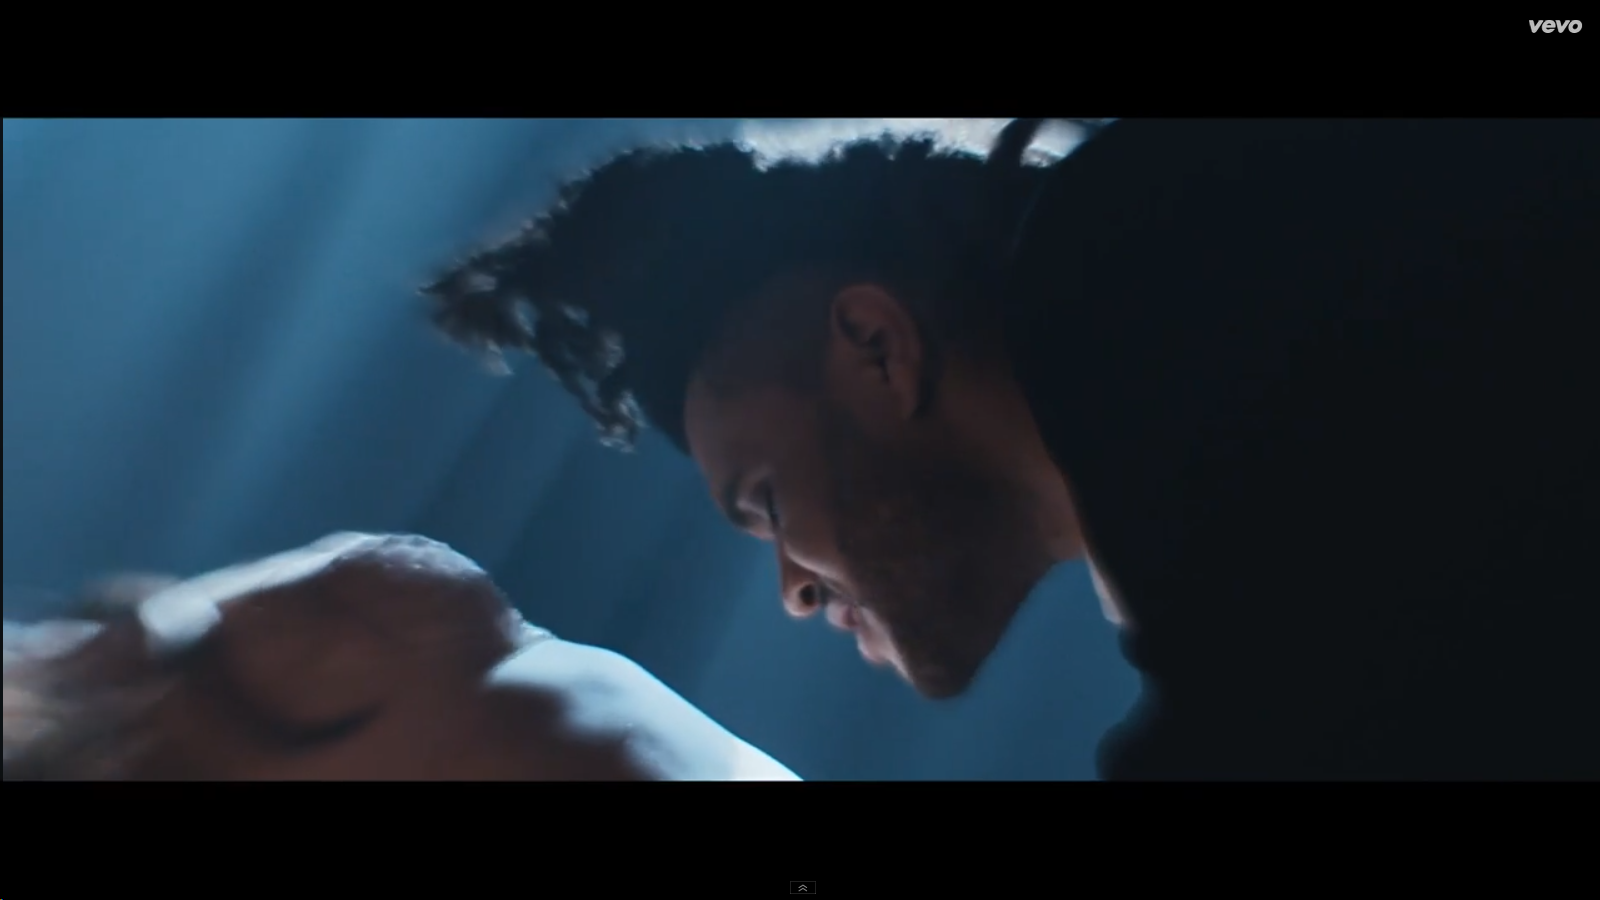 The Weeknd – “Earned It (Fifty Shades Of Grey)” Video (NSFW)